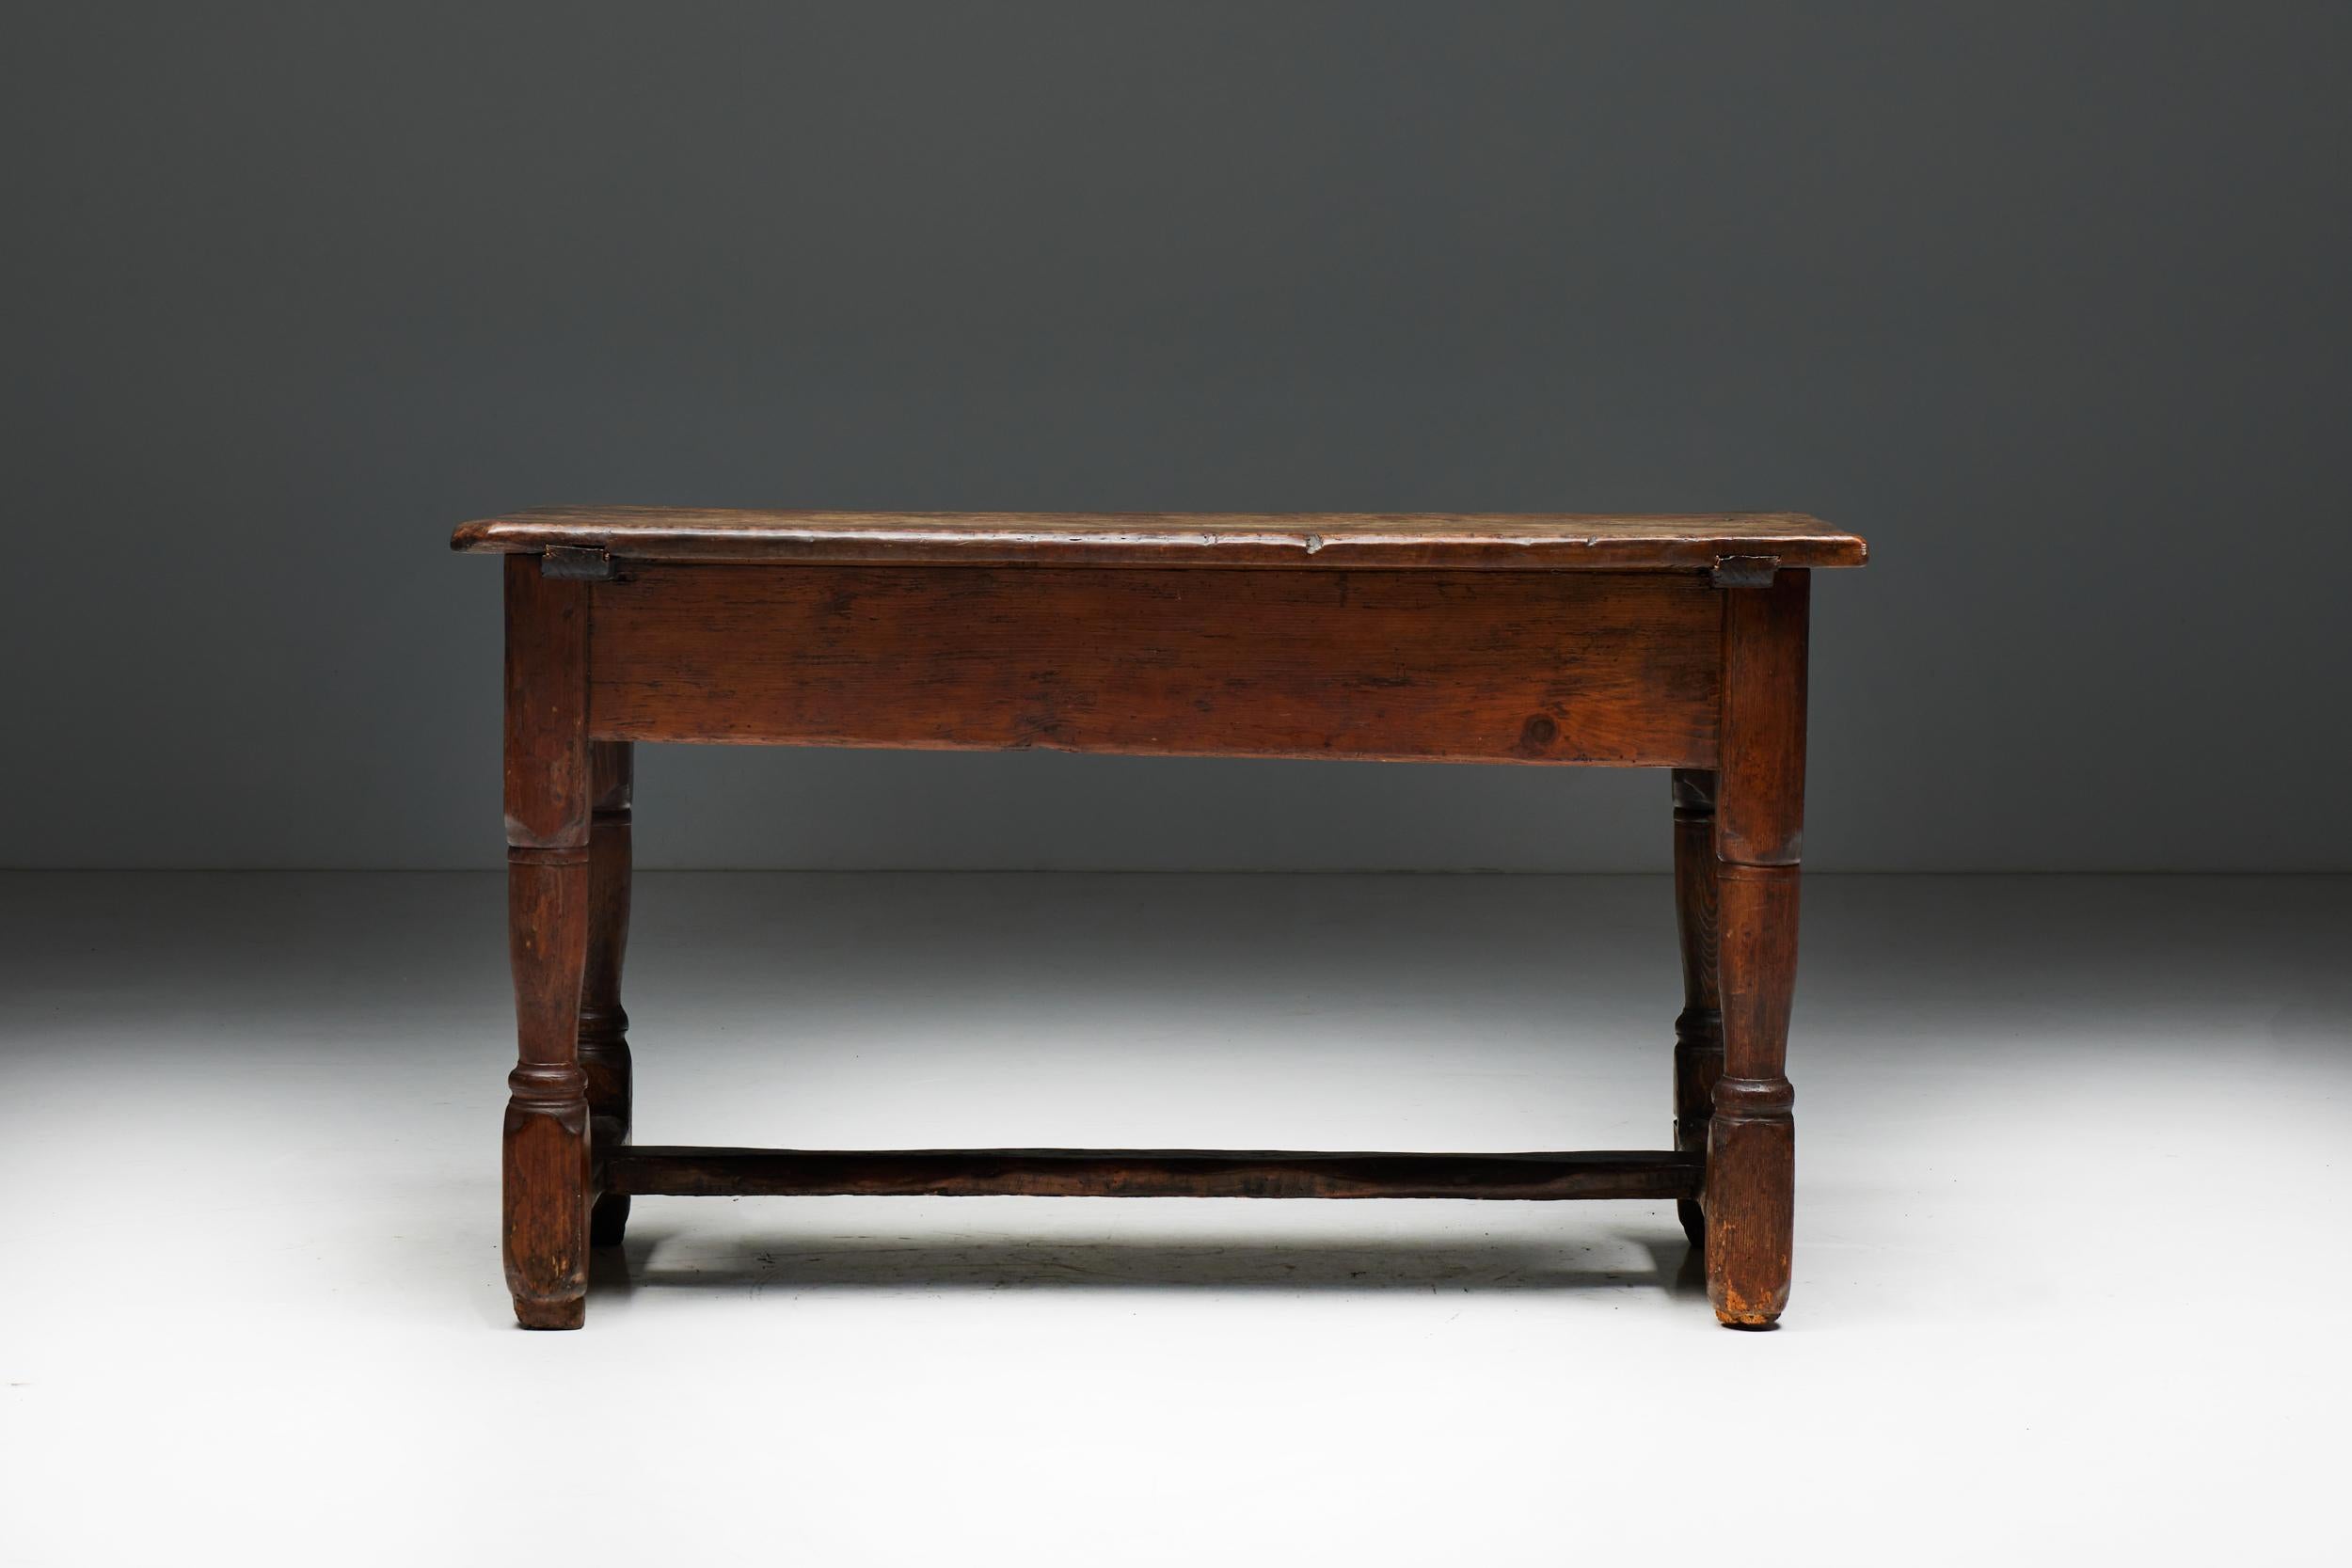 Rustic Art Populaire Writing Table, France, Early 20th Century For Sale 1